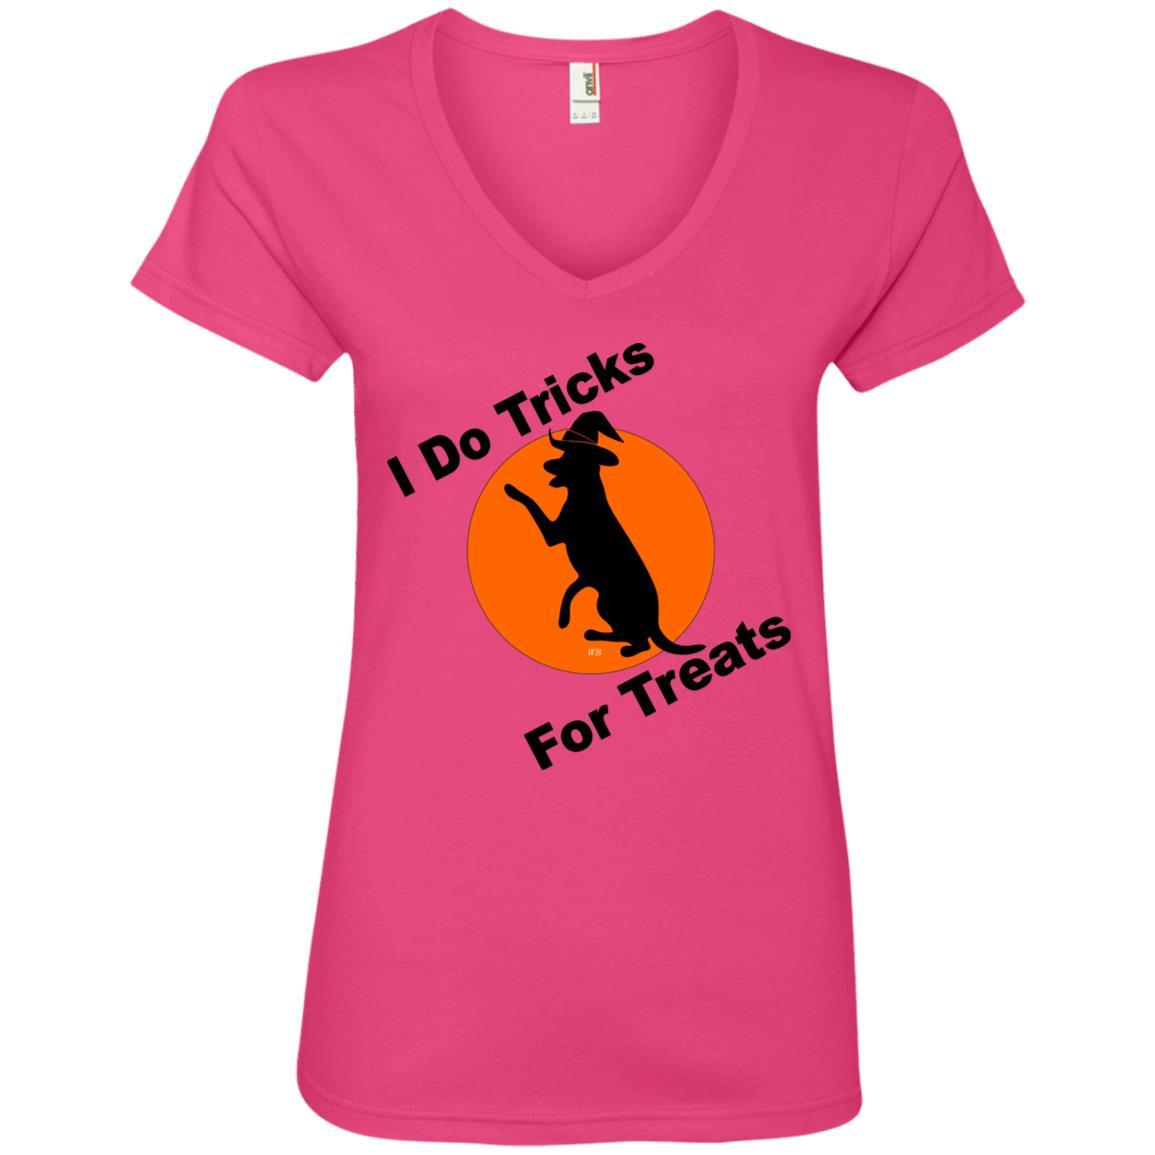 T-Shirts Hot Pink / S WineyBitches.Co "I Do Tricks For Treats" Dog- Ladies' V-Neck T-Shirt WineyBitchesCo